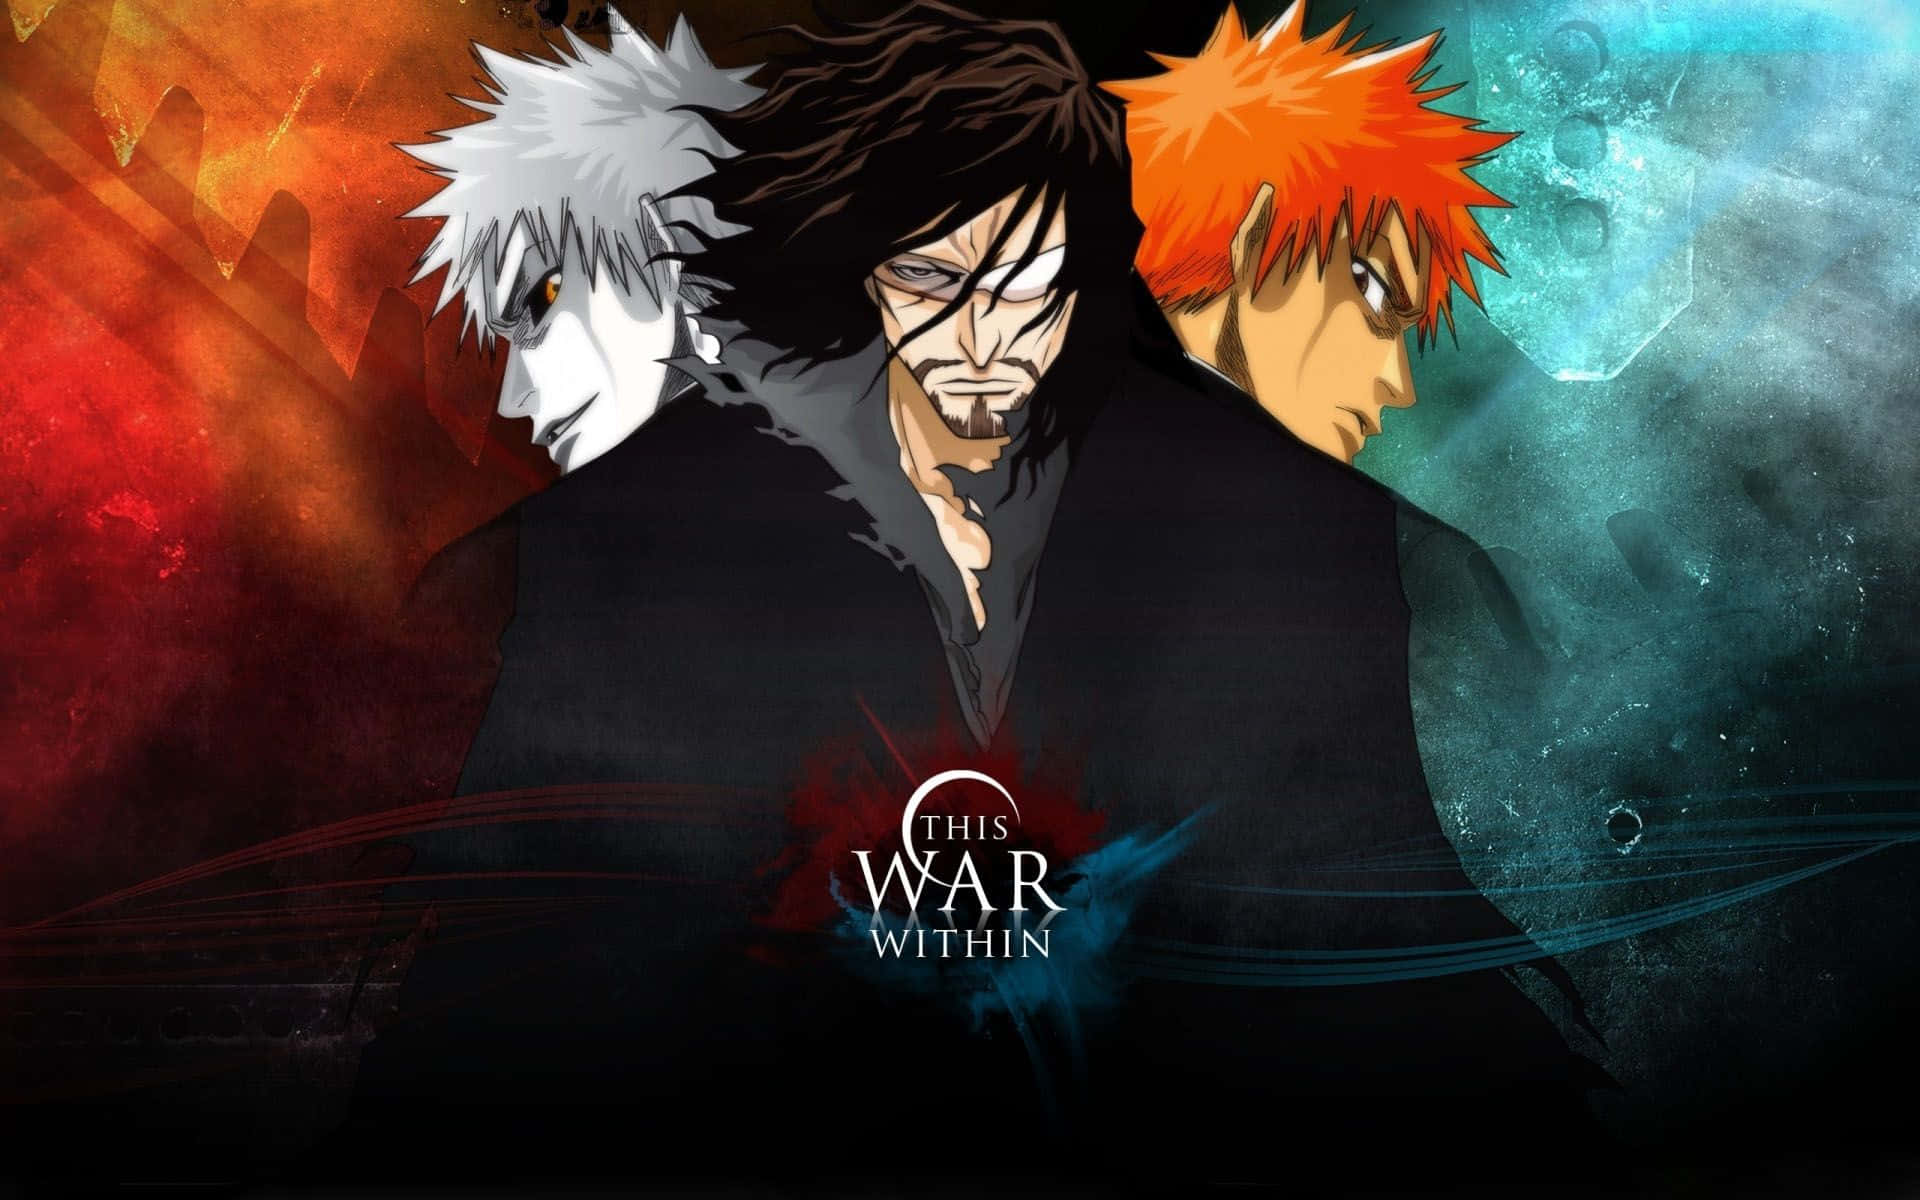 "Epic battles make up the thrilling world of Bleach"